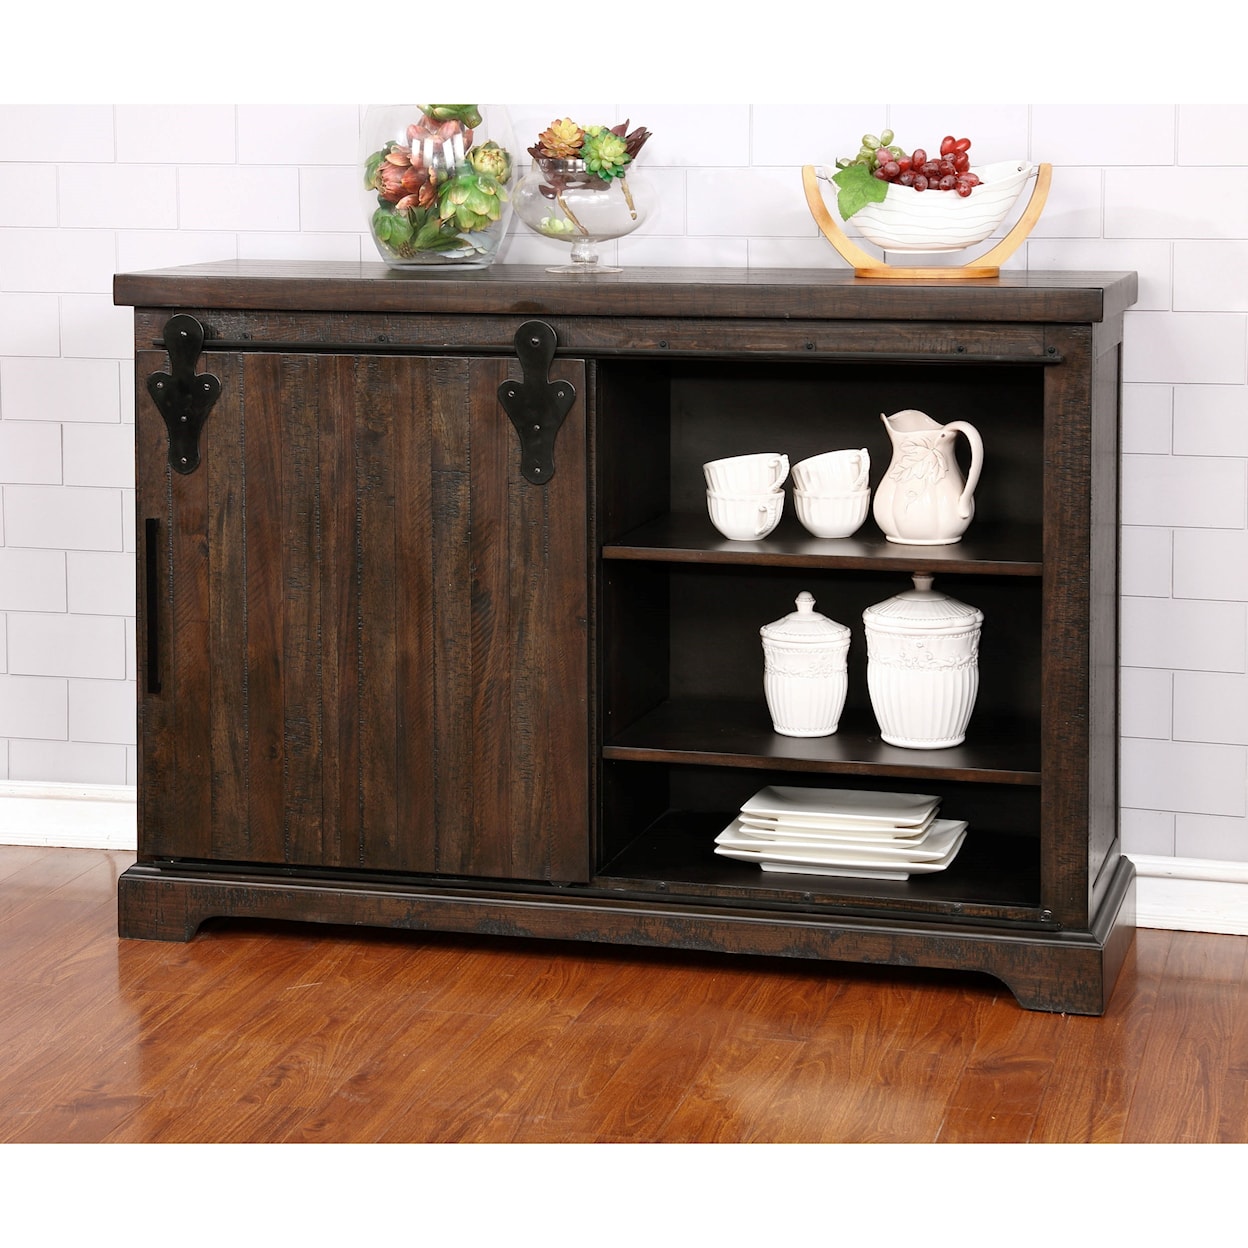 Avalon Furniture Lancaster Sideboard with Barn Door